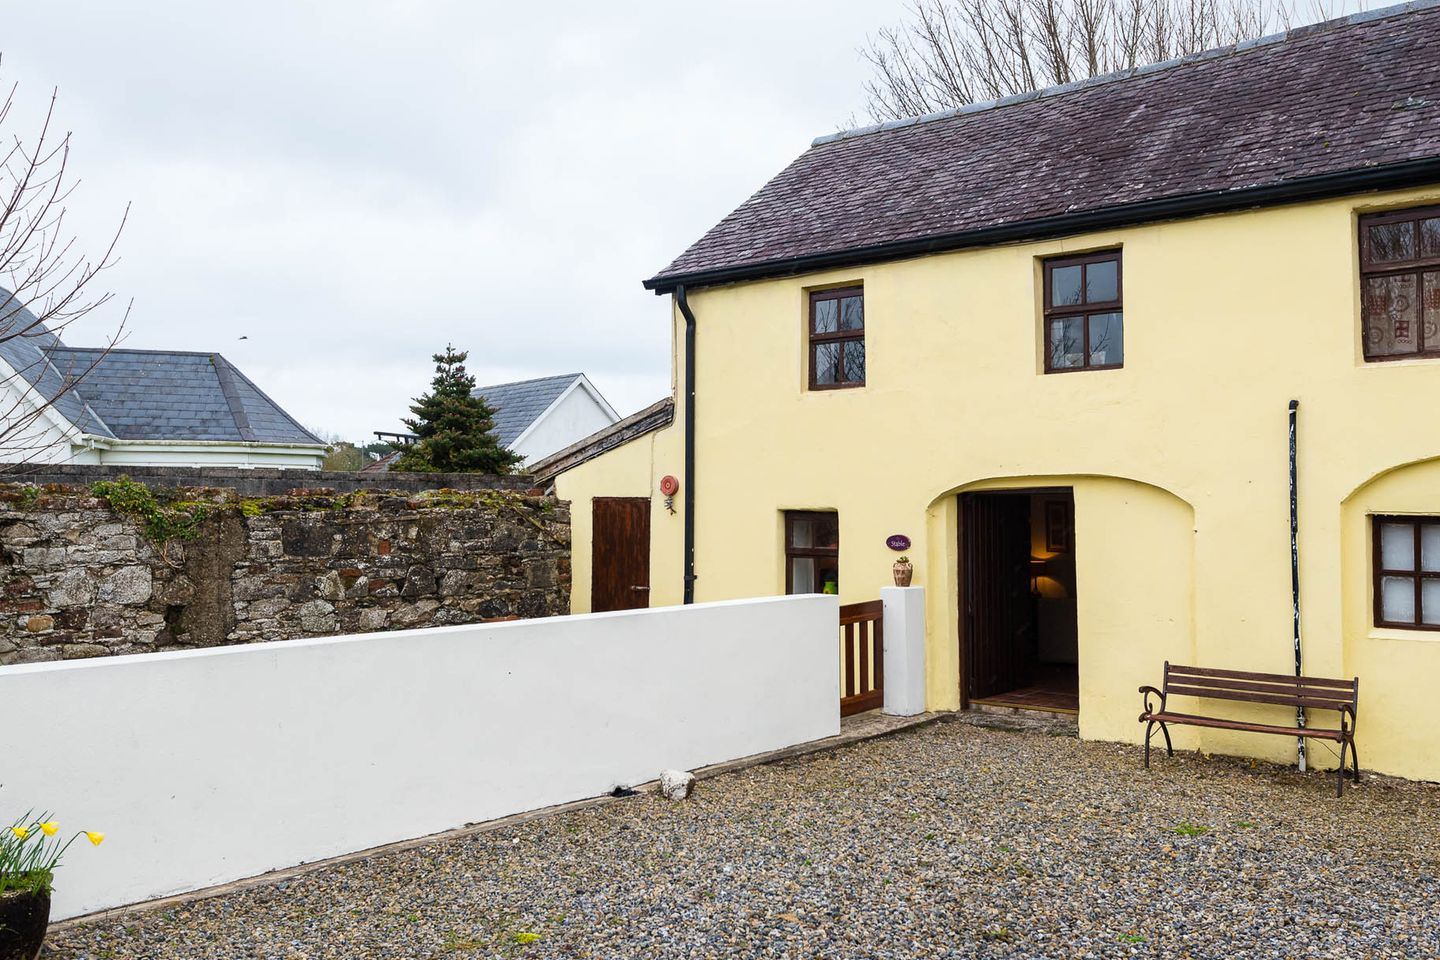 Ref. 1068283 The Stable, The Stable, Hook Cottages, Fethard-On-Sea, Co. Wexford